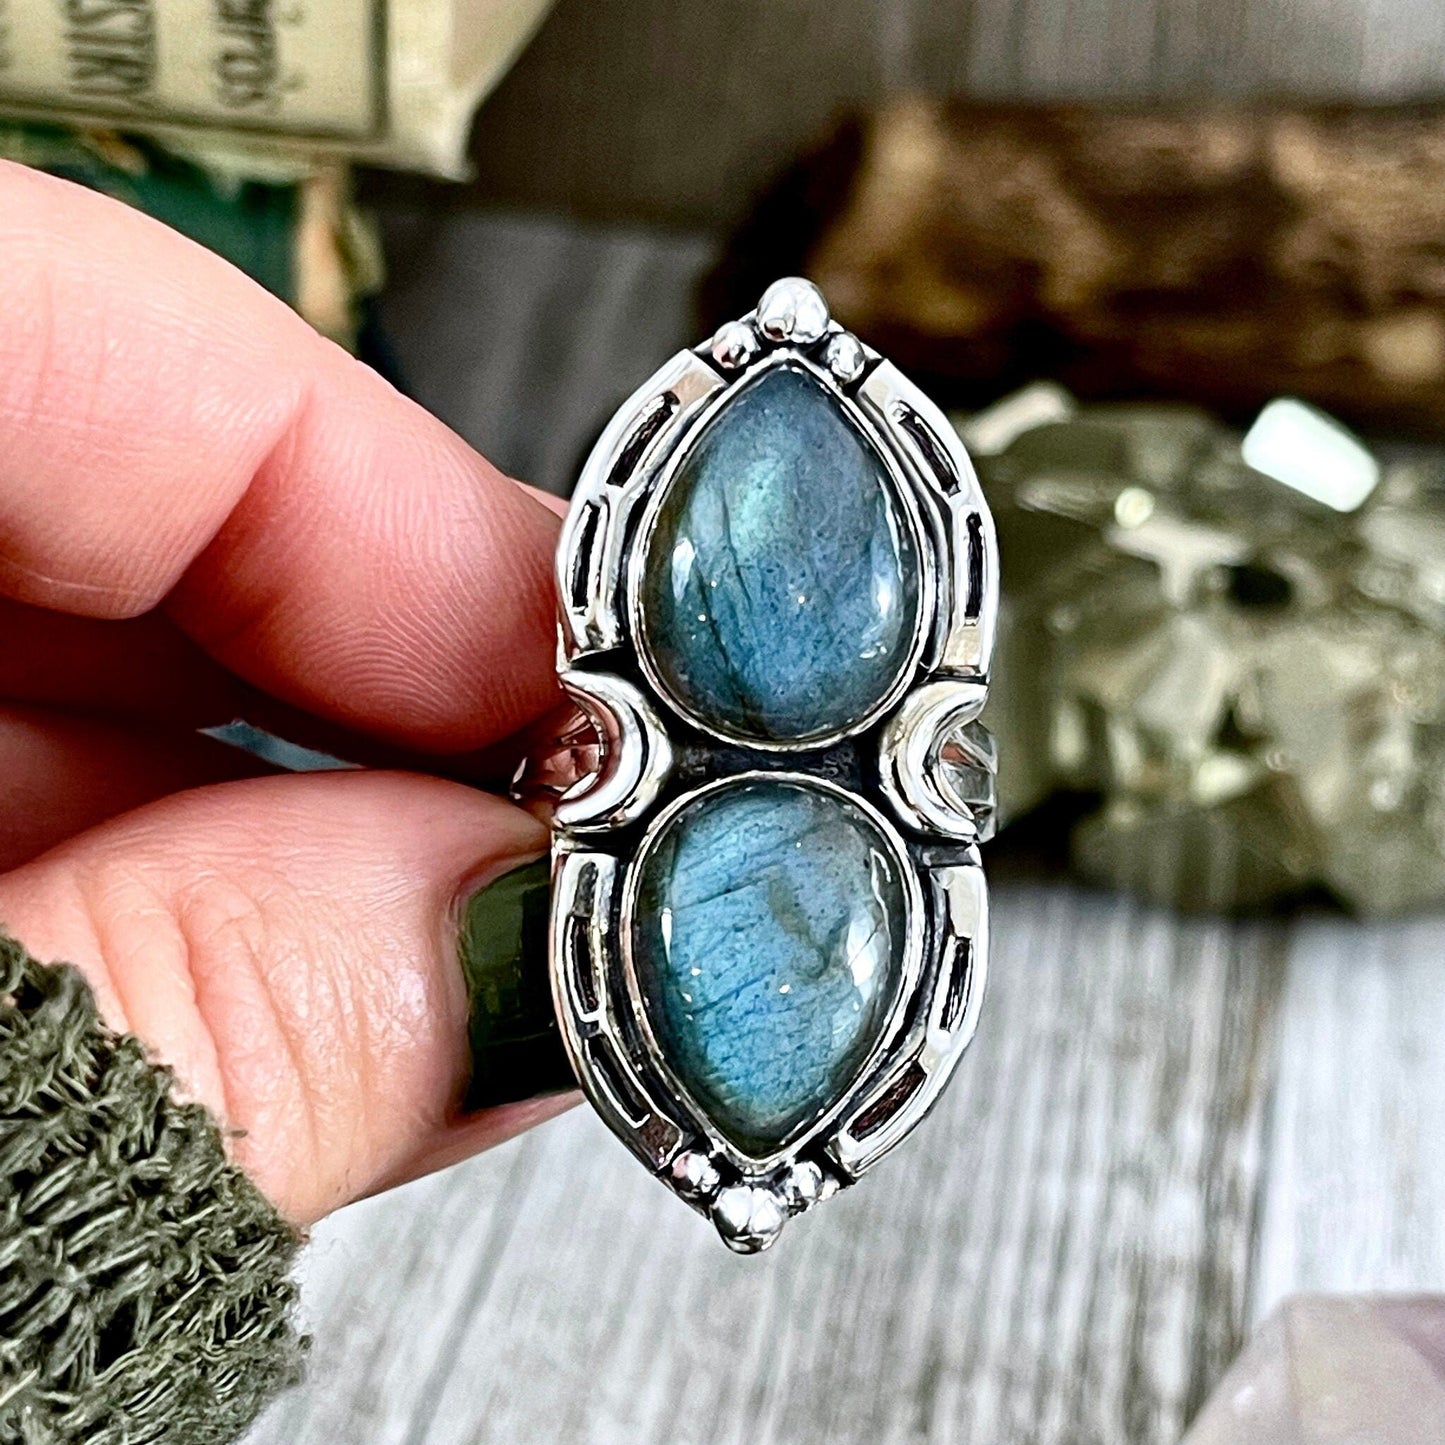 Mystic Moons Labradorite Crystal Ring Sterling Silver Designed FOXLARK Collection Size 6 7 8 9 10